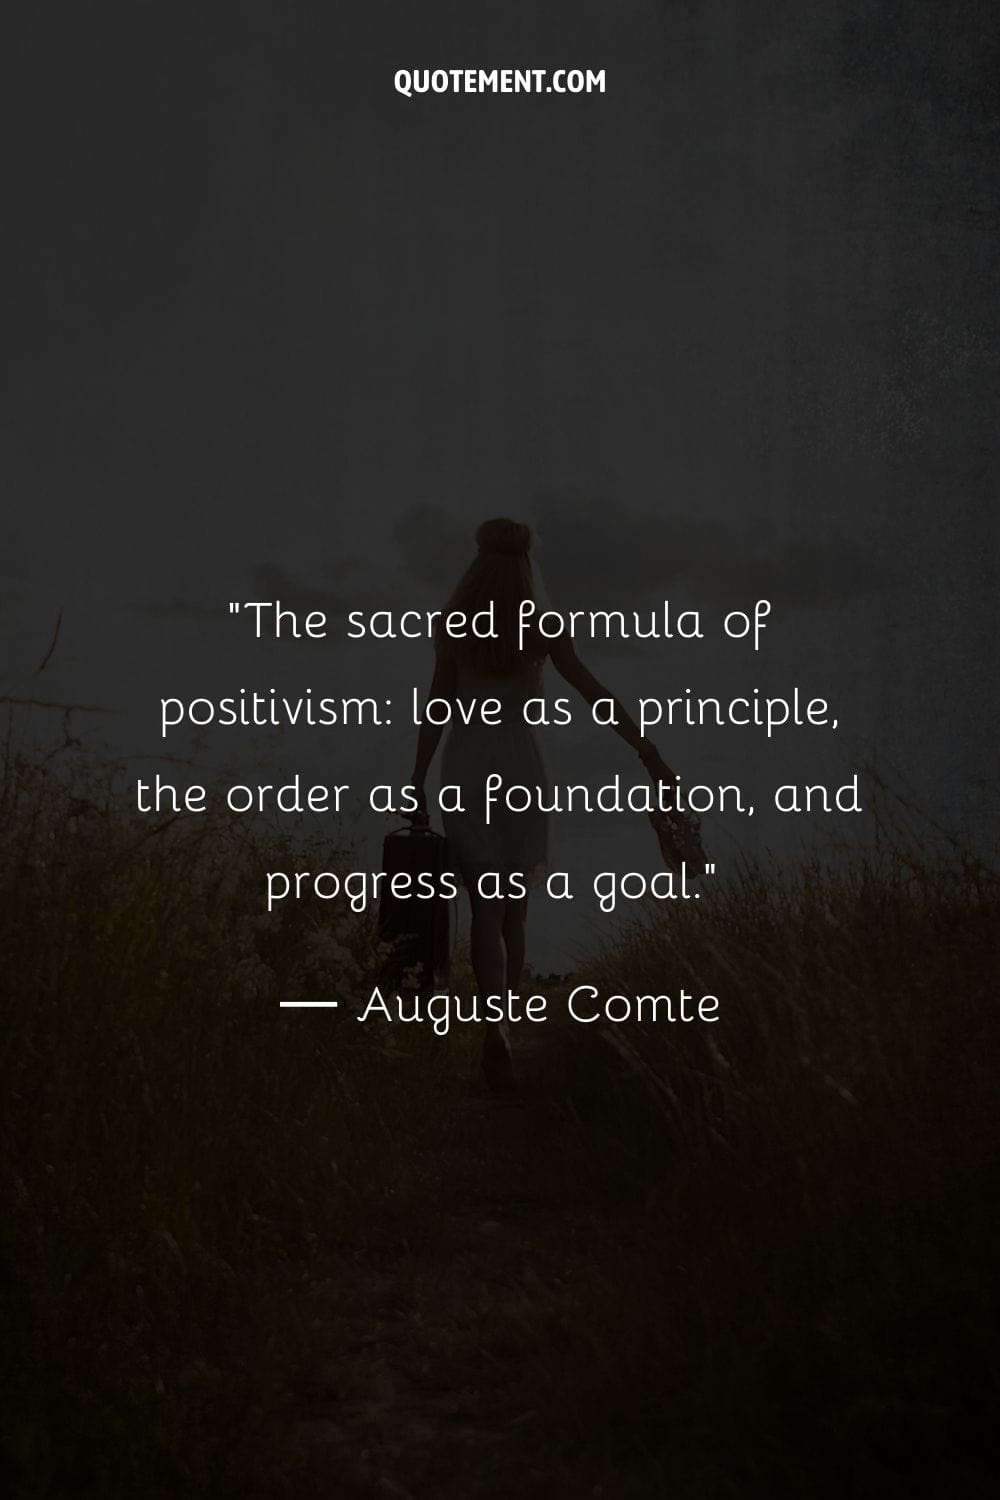 The sacred formula of positivism love as a principle, the order as a foundation, and progress as a goal